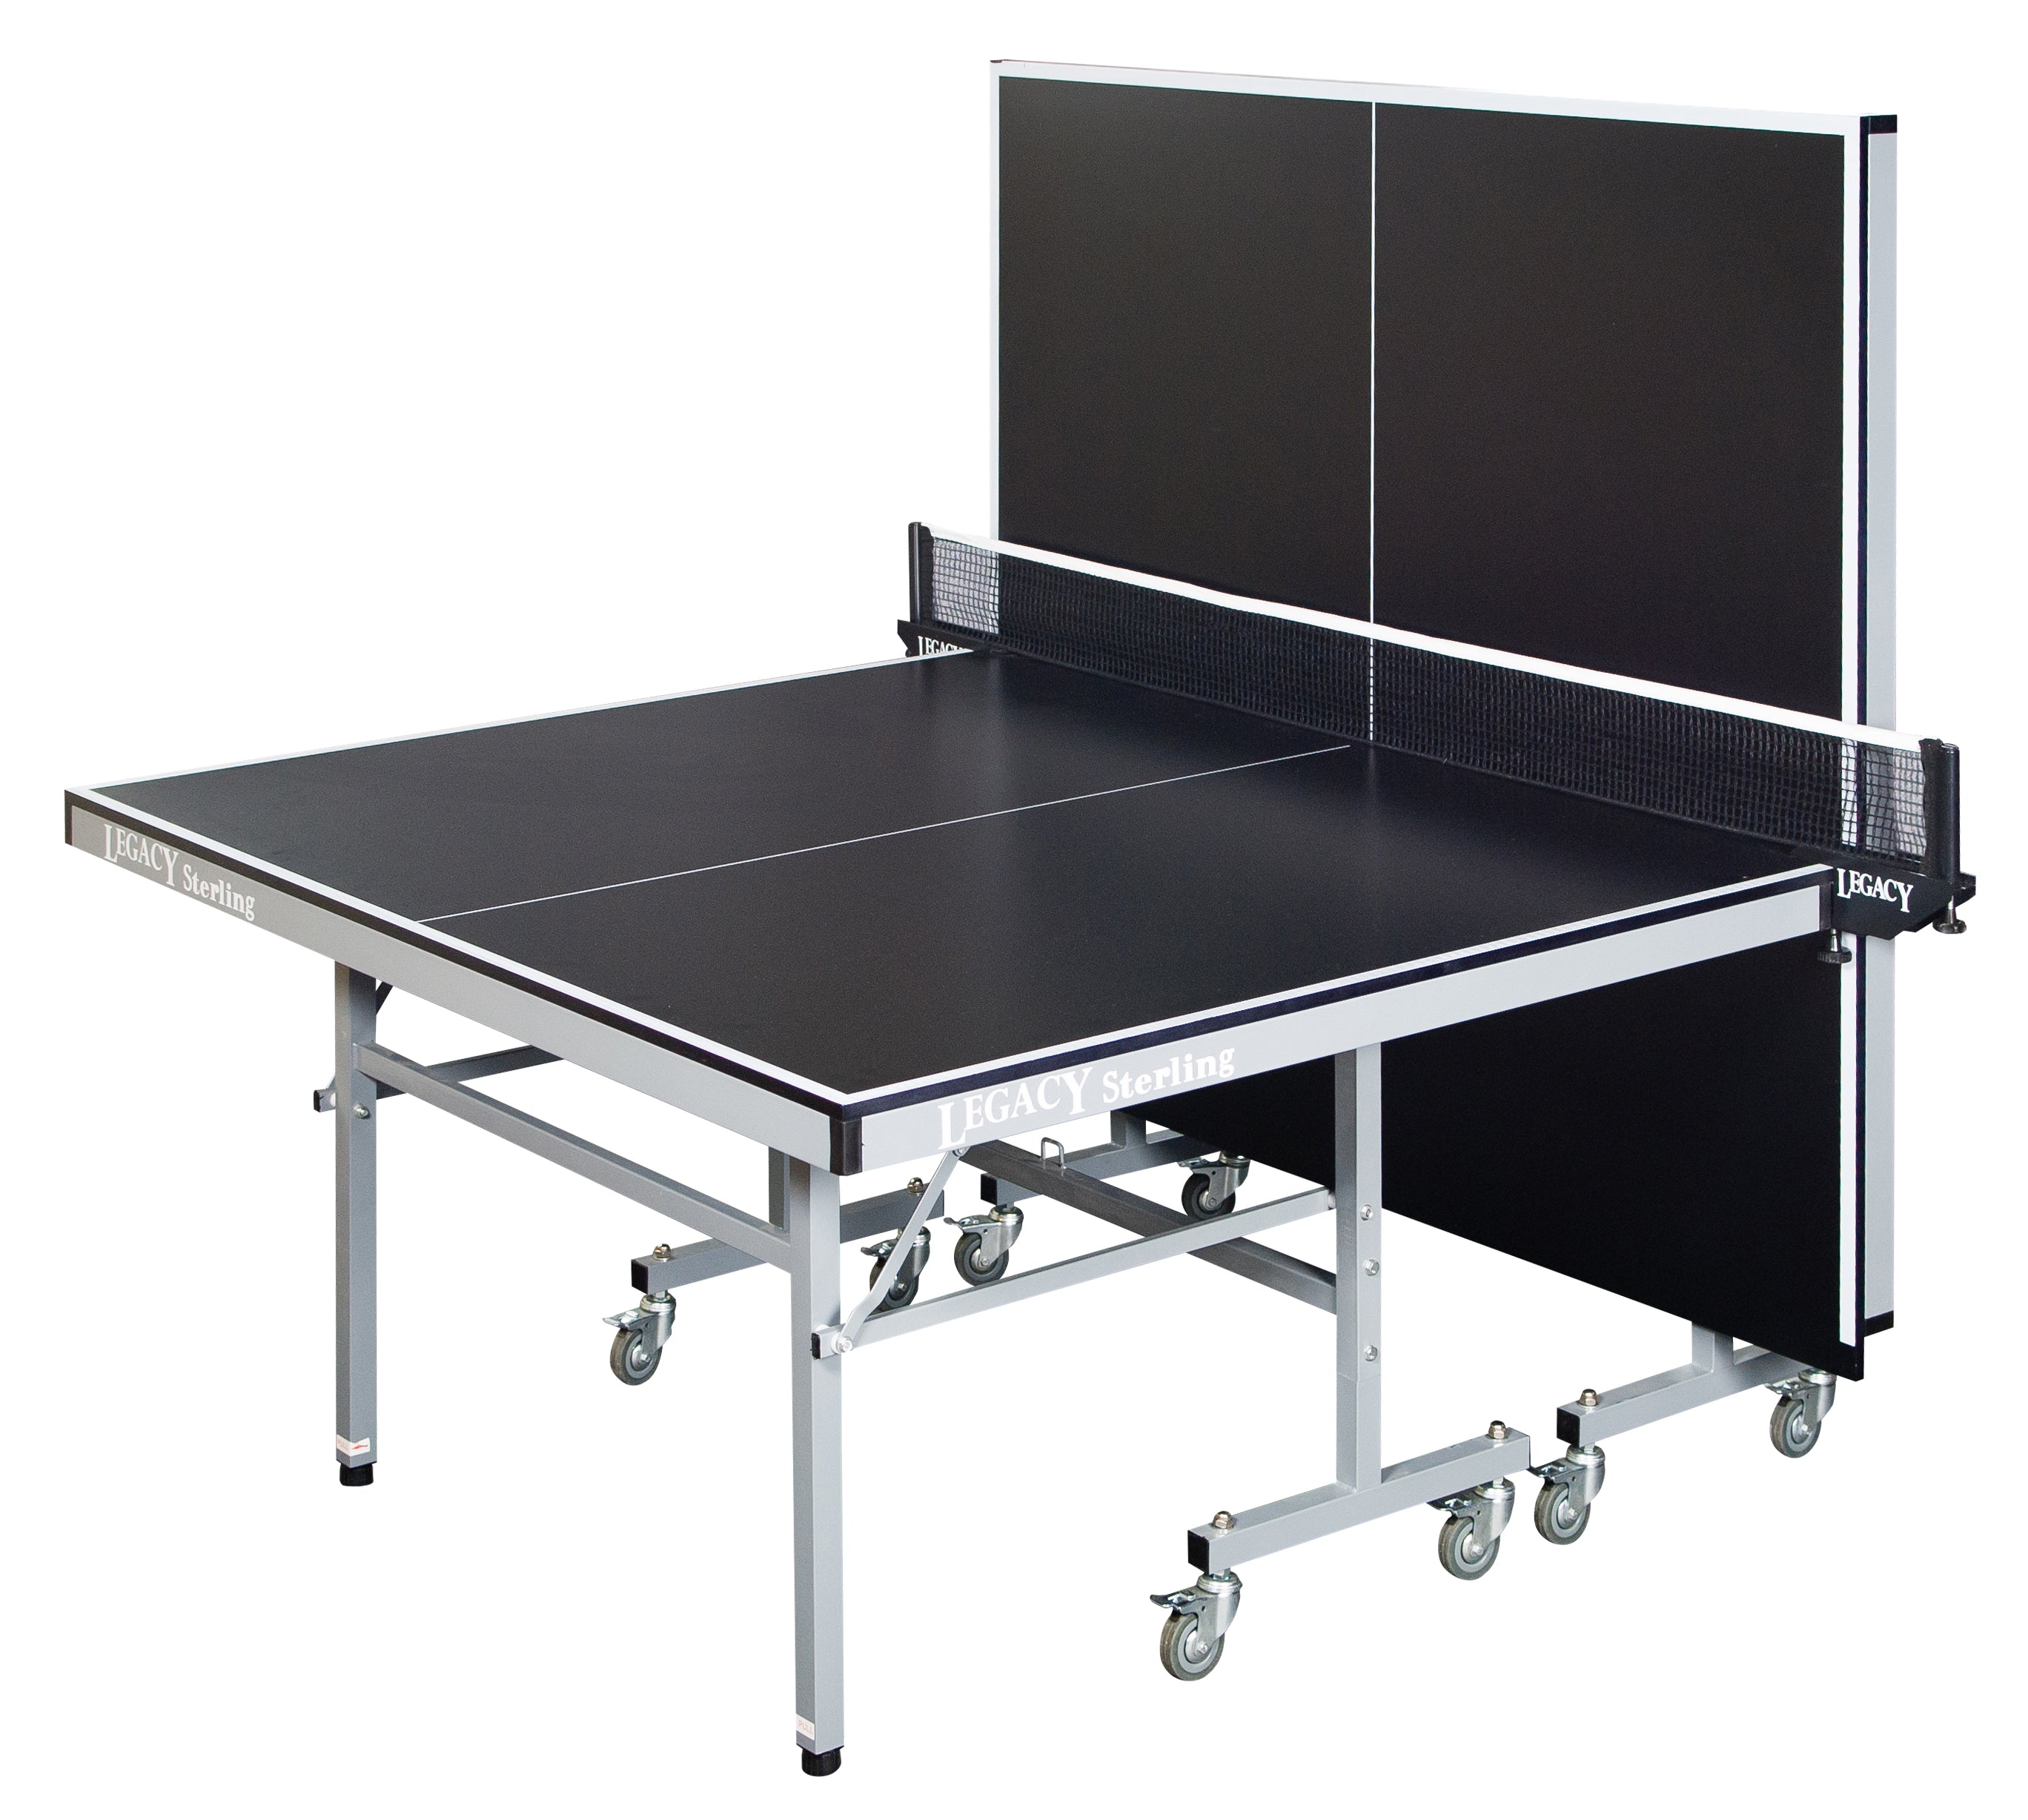 Legacy Billiards Sterling Table Tennis Table with One Half Folded Up